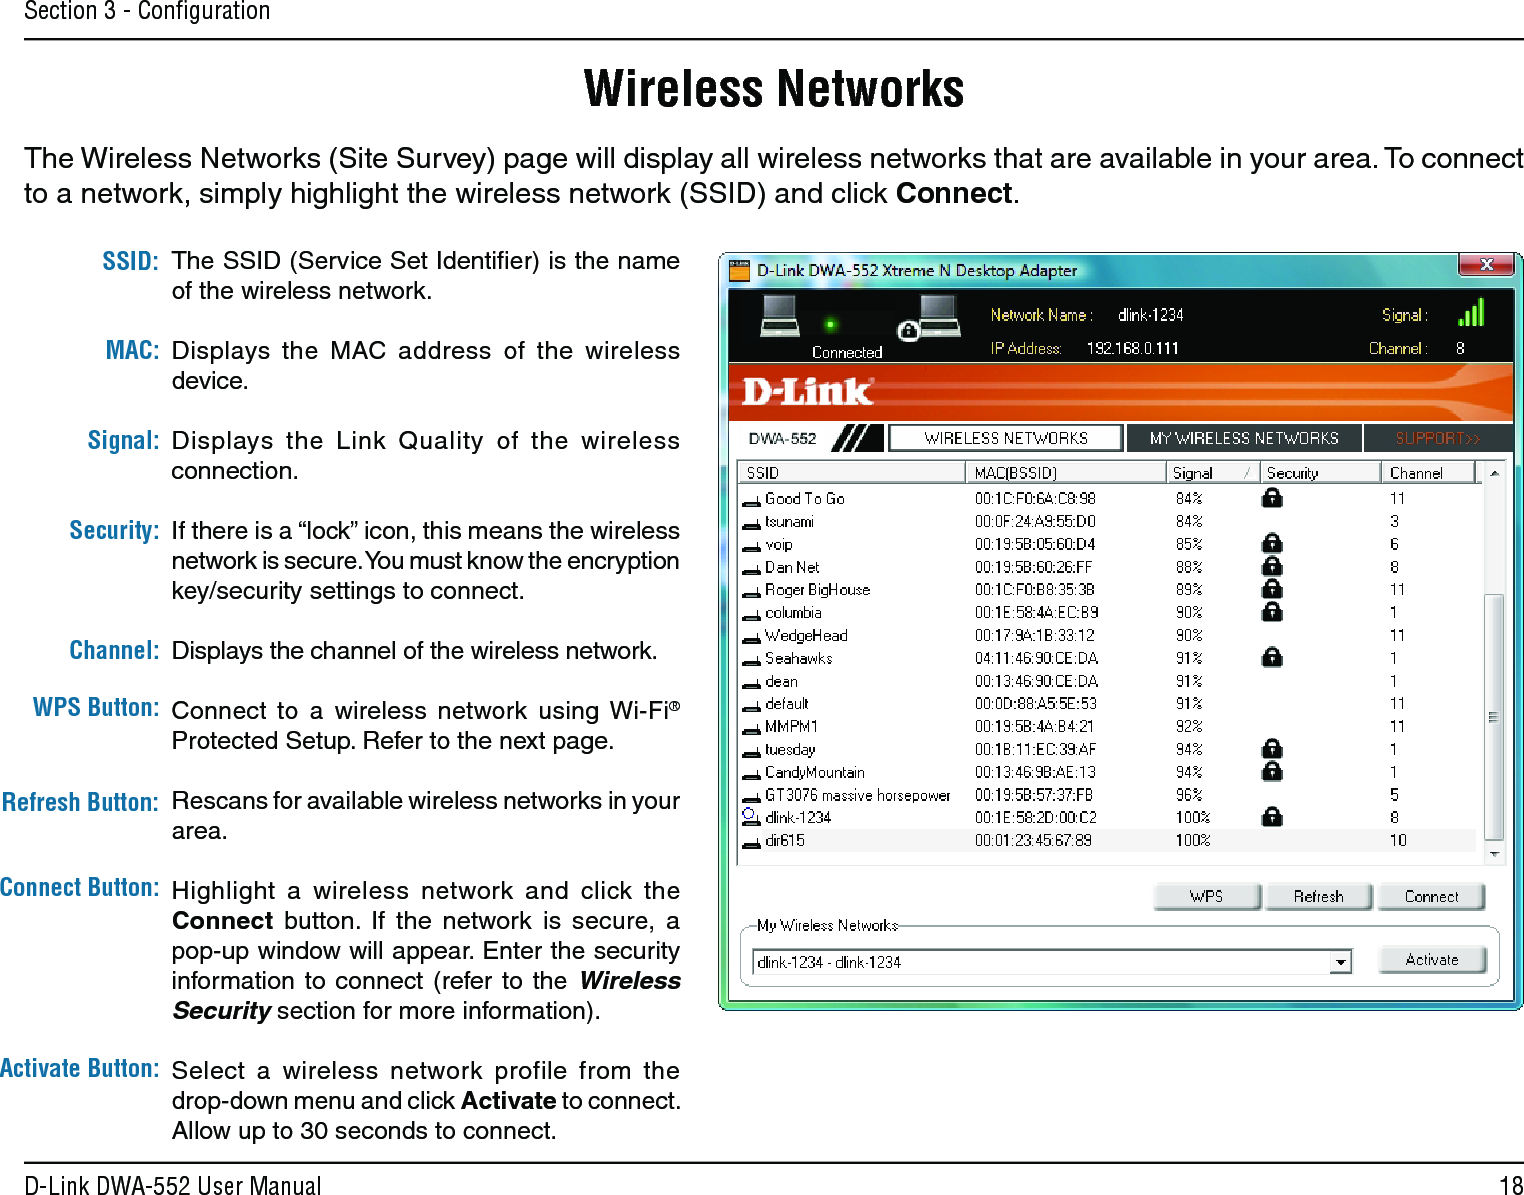 18D-Link DWA-552 User ManualSection 3 - ConﬁgurationWireless NetworksThe Wireless Networks (Site Survey) page will display all wireless networks that are available in your area. To connect to a network, simply highlight the wireless network (SSID) and click Connect.The SSID (Service Set Identiﬁer) is the name of the wireless network.Displays  the  MAC  address  of  the  wireless device.Displays  the  Link  Quality  of  the  wireless connection. If there is a “lock” icon, this means the wireless network is secure. You must know the encryption key/security settings to connect.Displays the channel of the wireless network.Connect  to  a  wireless  network  using Wi-Fi® Protected Setup. Refer to the next page.Rescans for available wireless networks in your area.Highlight  a  wireless  network  and  click  the Connect  button.  If  the  network  is  secure,  a pop-up window will appear. Enter the security information  to  connect  (refer to the  Wireless Security section for more information).Select  a  wireless  network  profile  from  the  drop-down menu and click Activate to connect. Allow up to 30 seconds to connect.MAC:SSID:Channel:Signal:Security:Refresh Button:Connect Button:Activate Button:WPS Button: